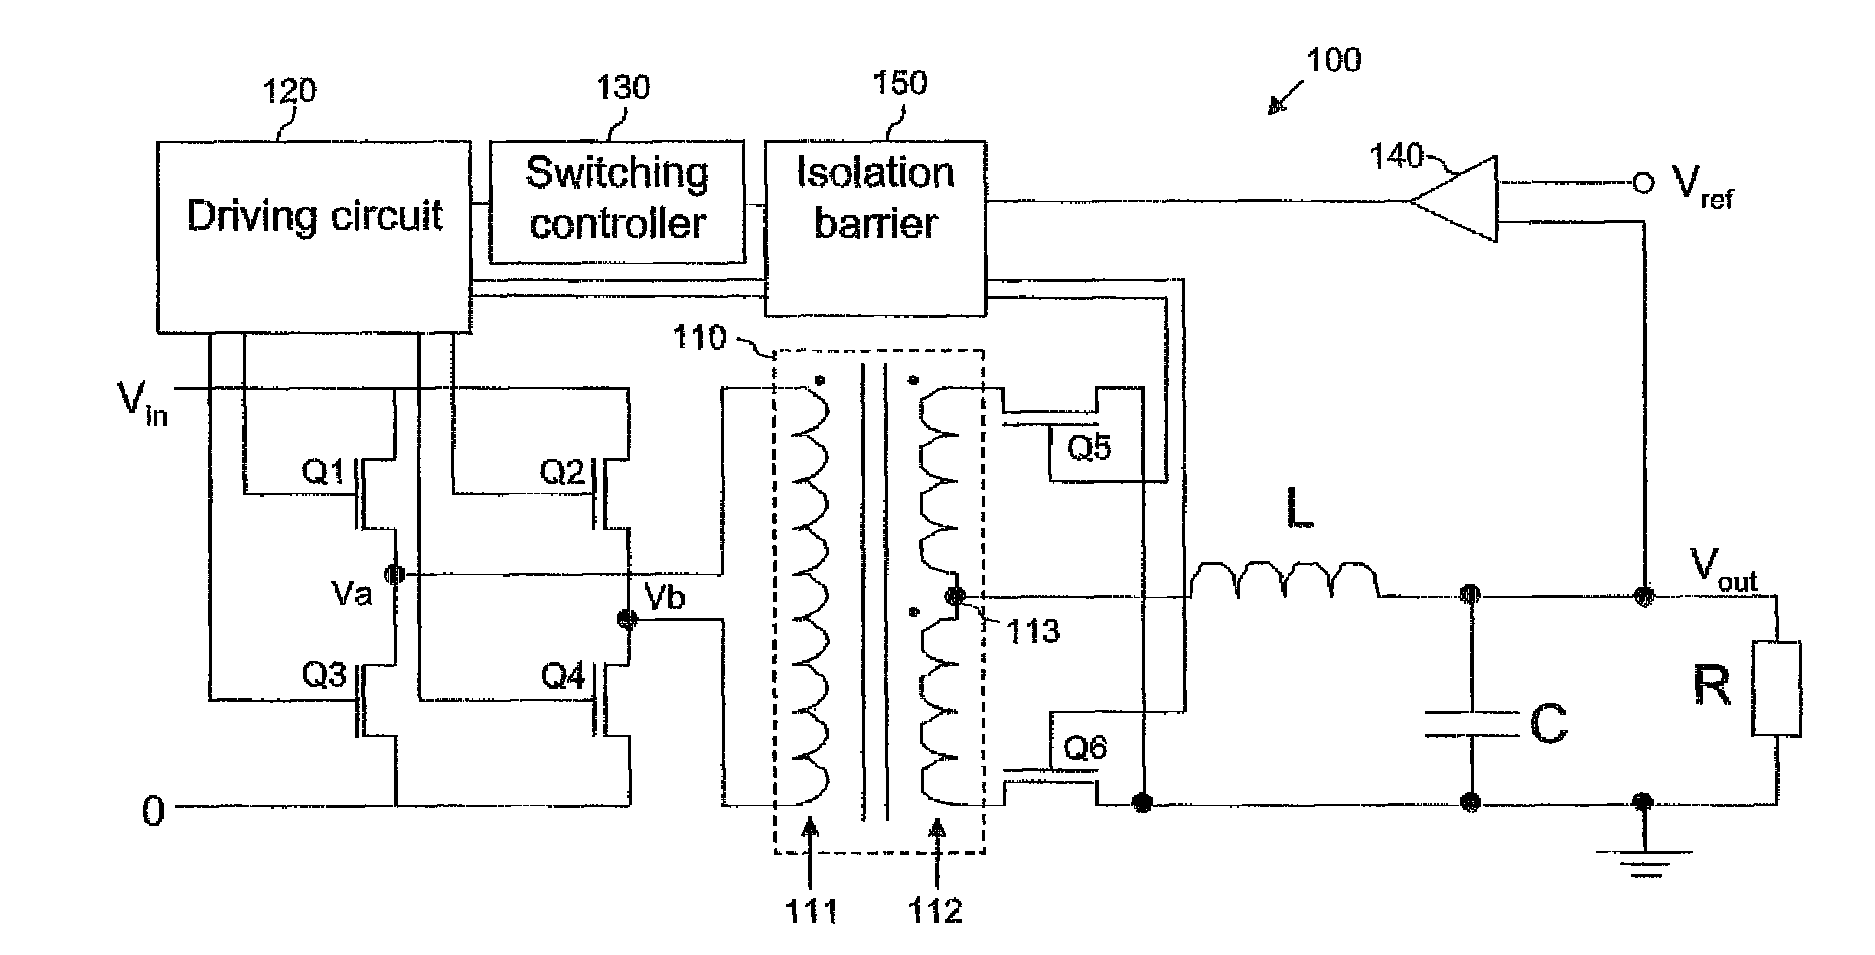 Start-up procedure for an isolated switched mode power supply